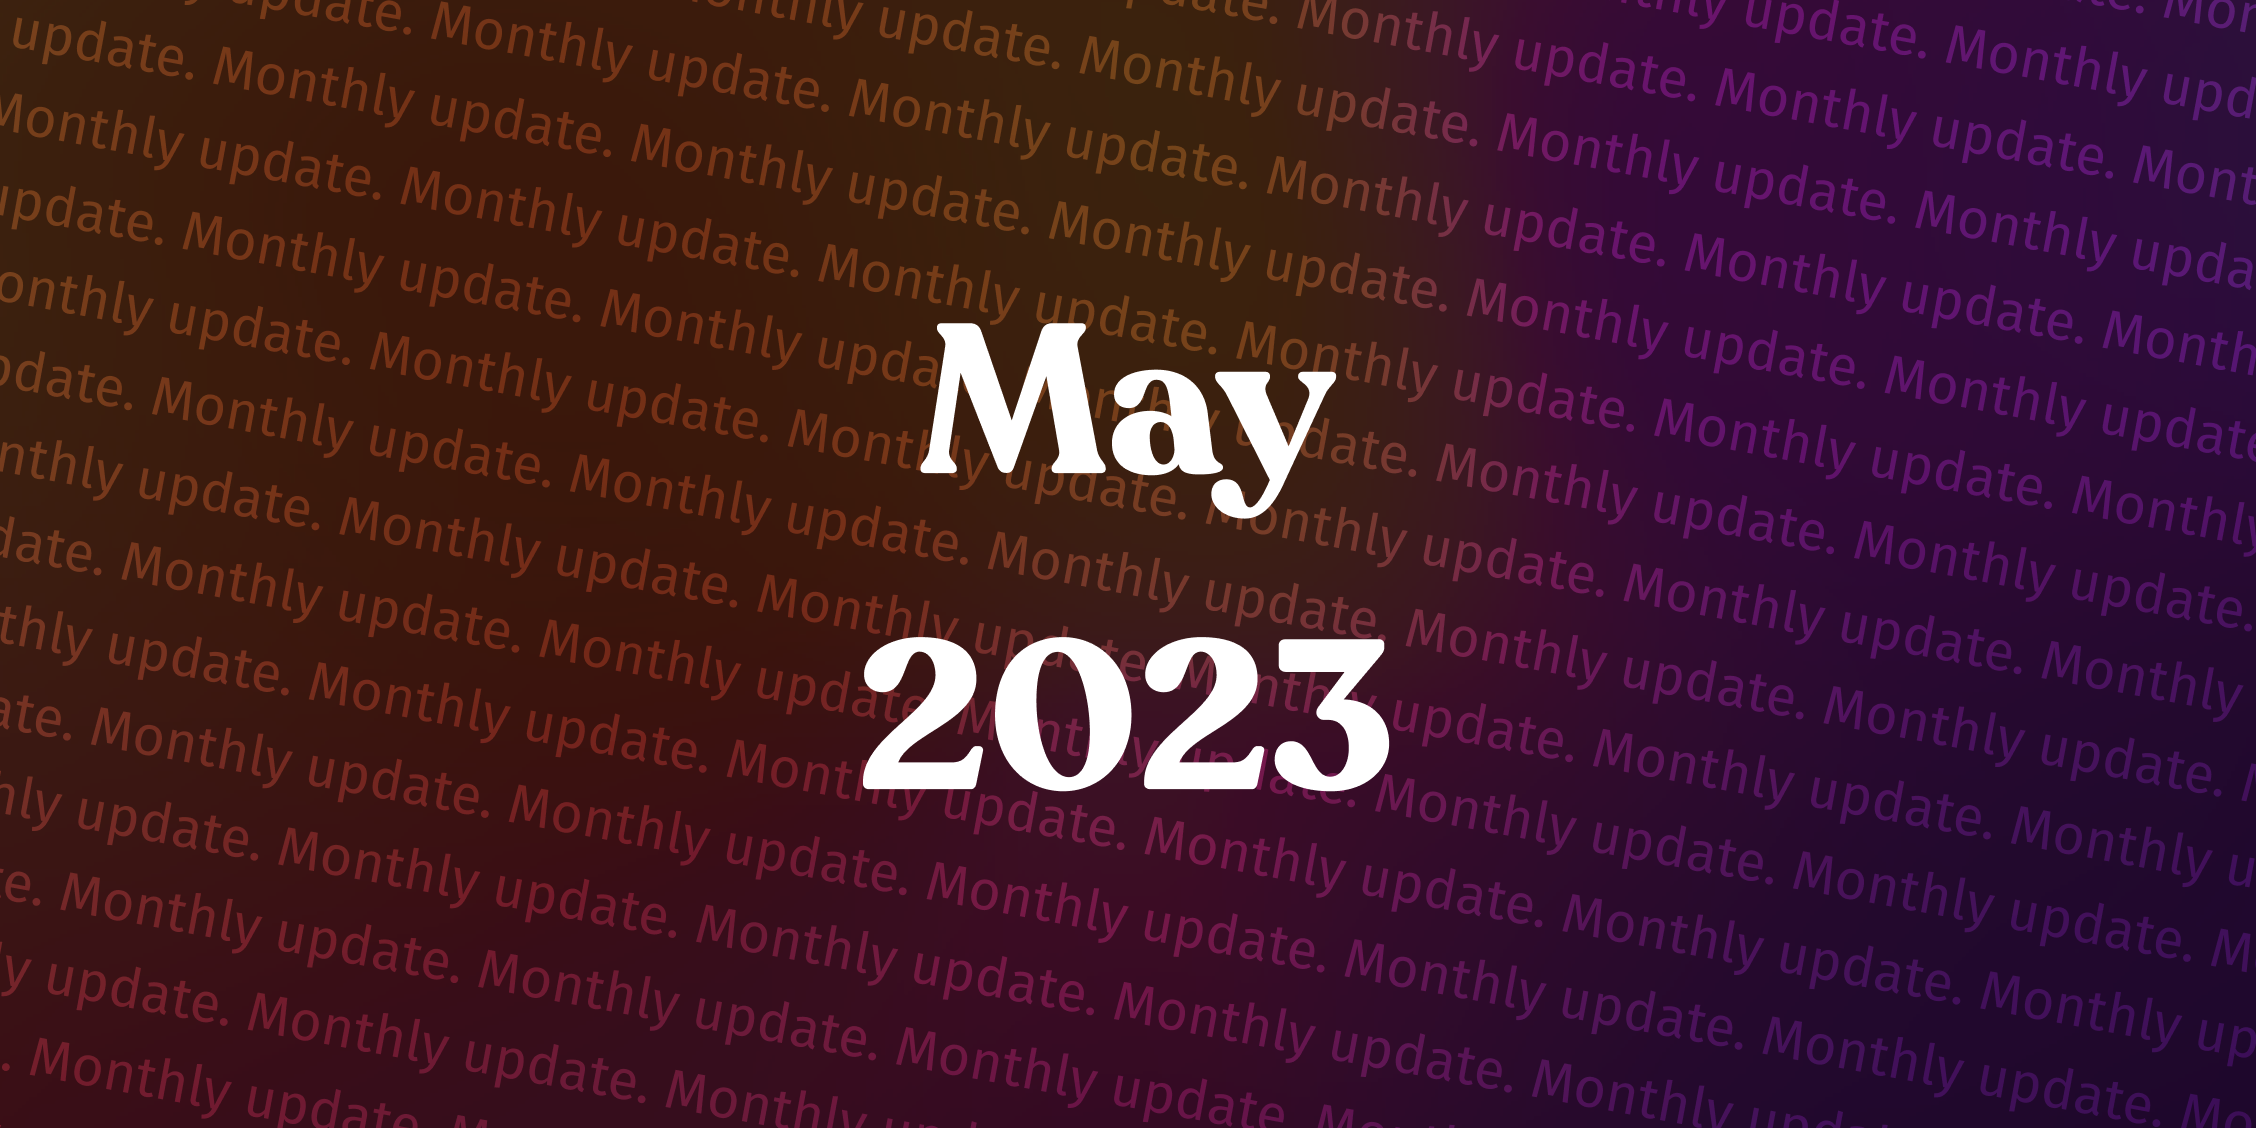 What’s new in Pausly, May 2023